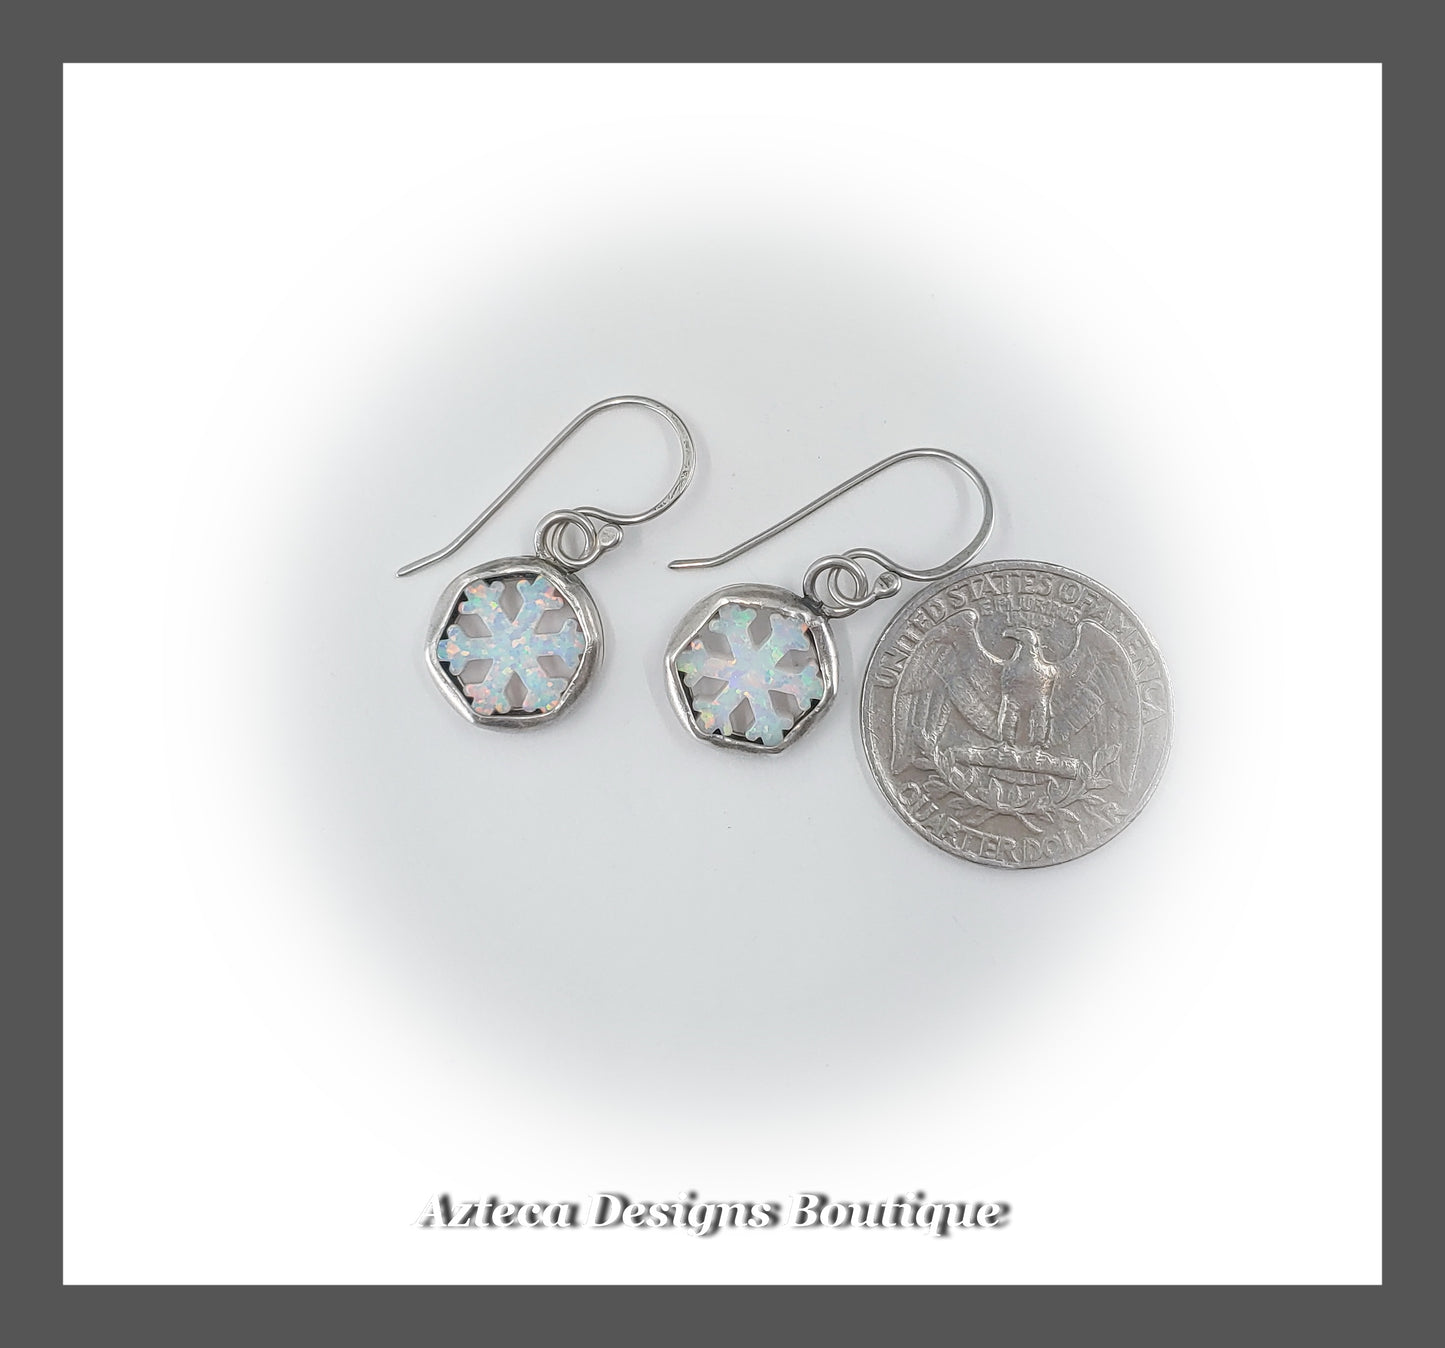 White Synthetic Opal Snowflake + Hand Fabricated Argentium Silver Earrings